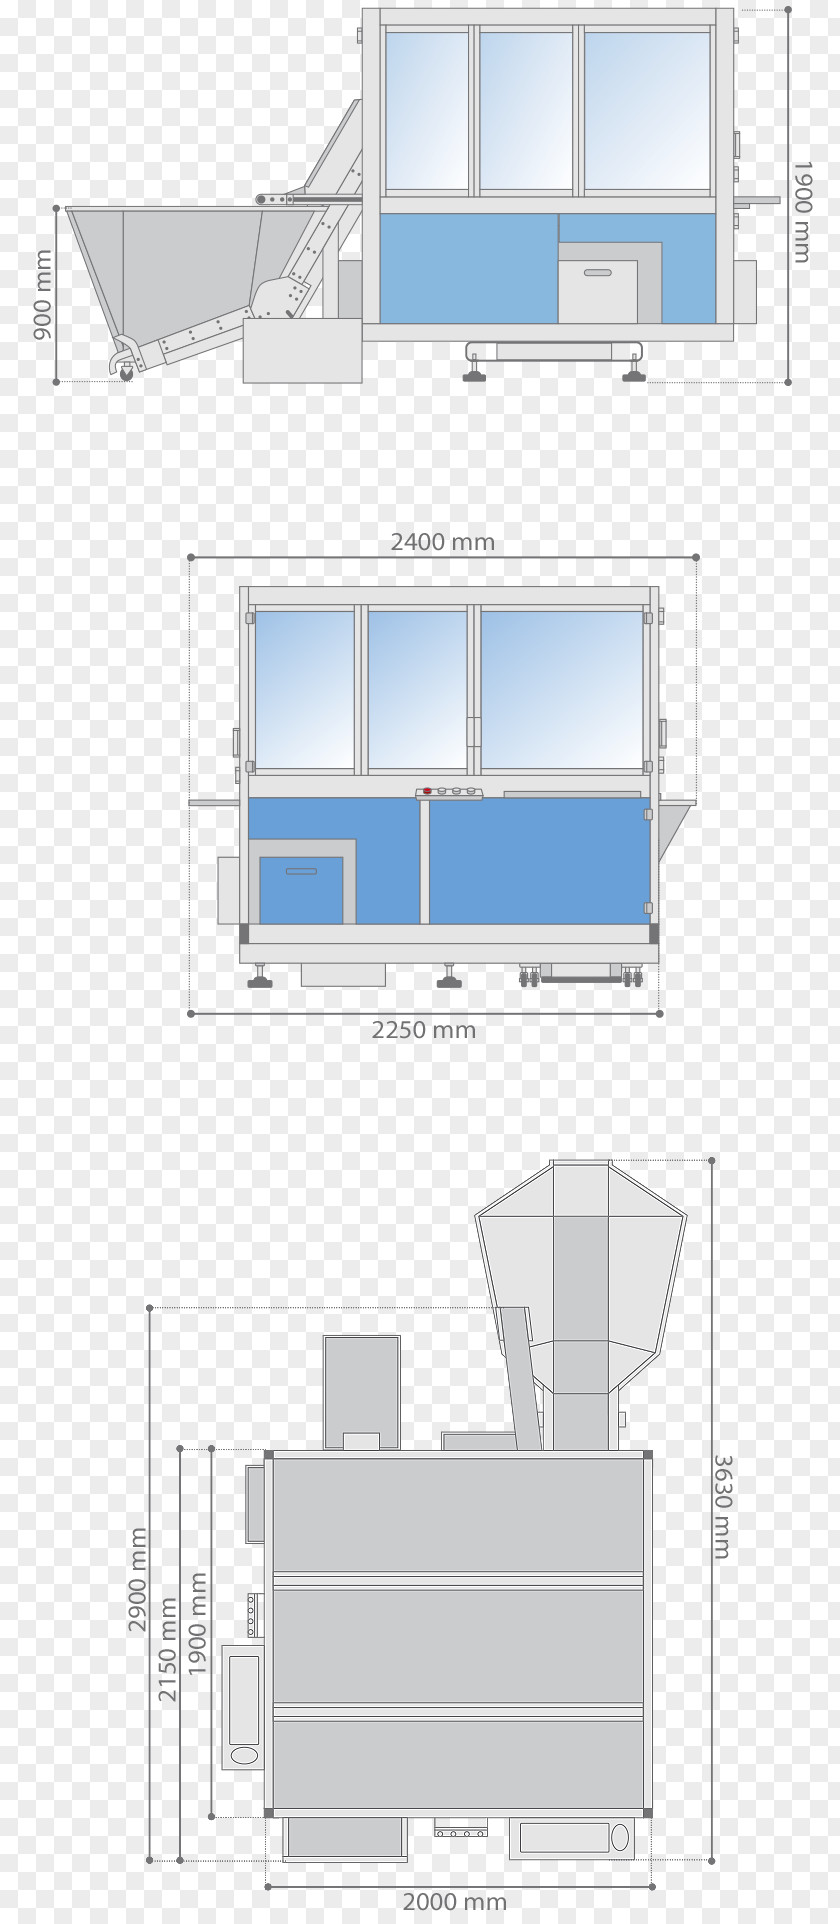 Peripheral Vision Defect Architecture Industrial Design Furniture Product Floor Plan PNG